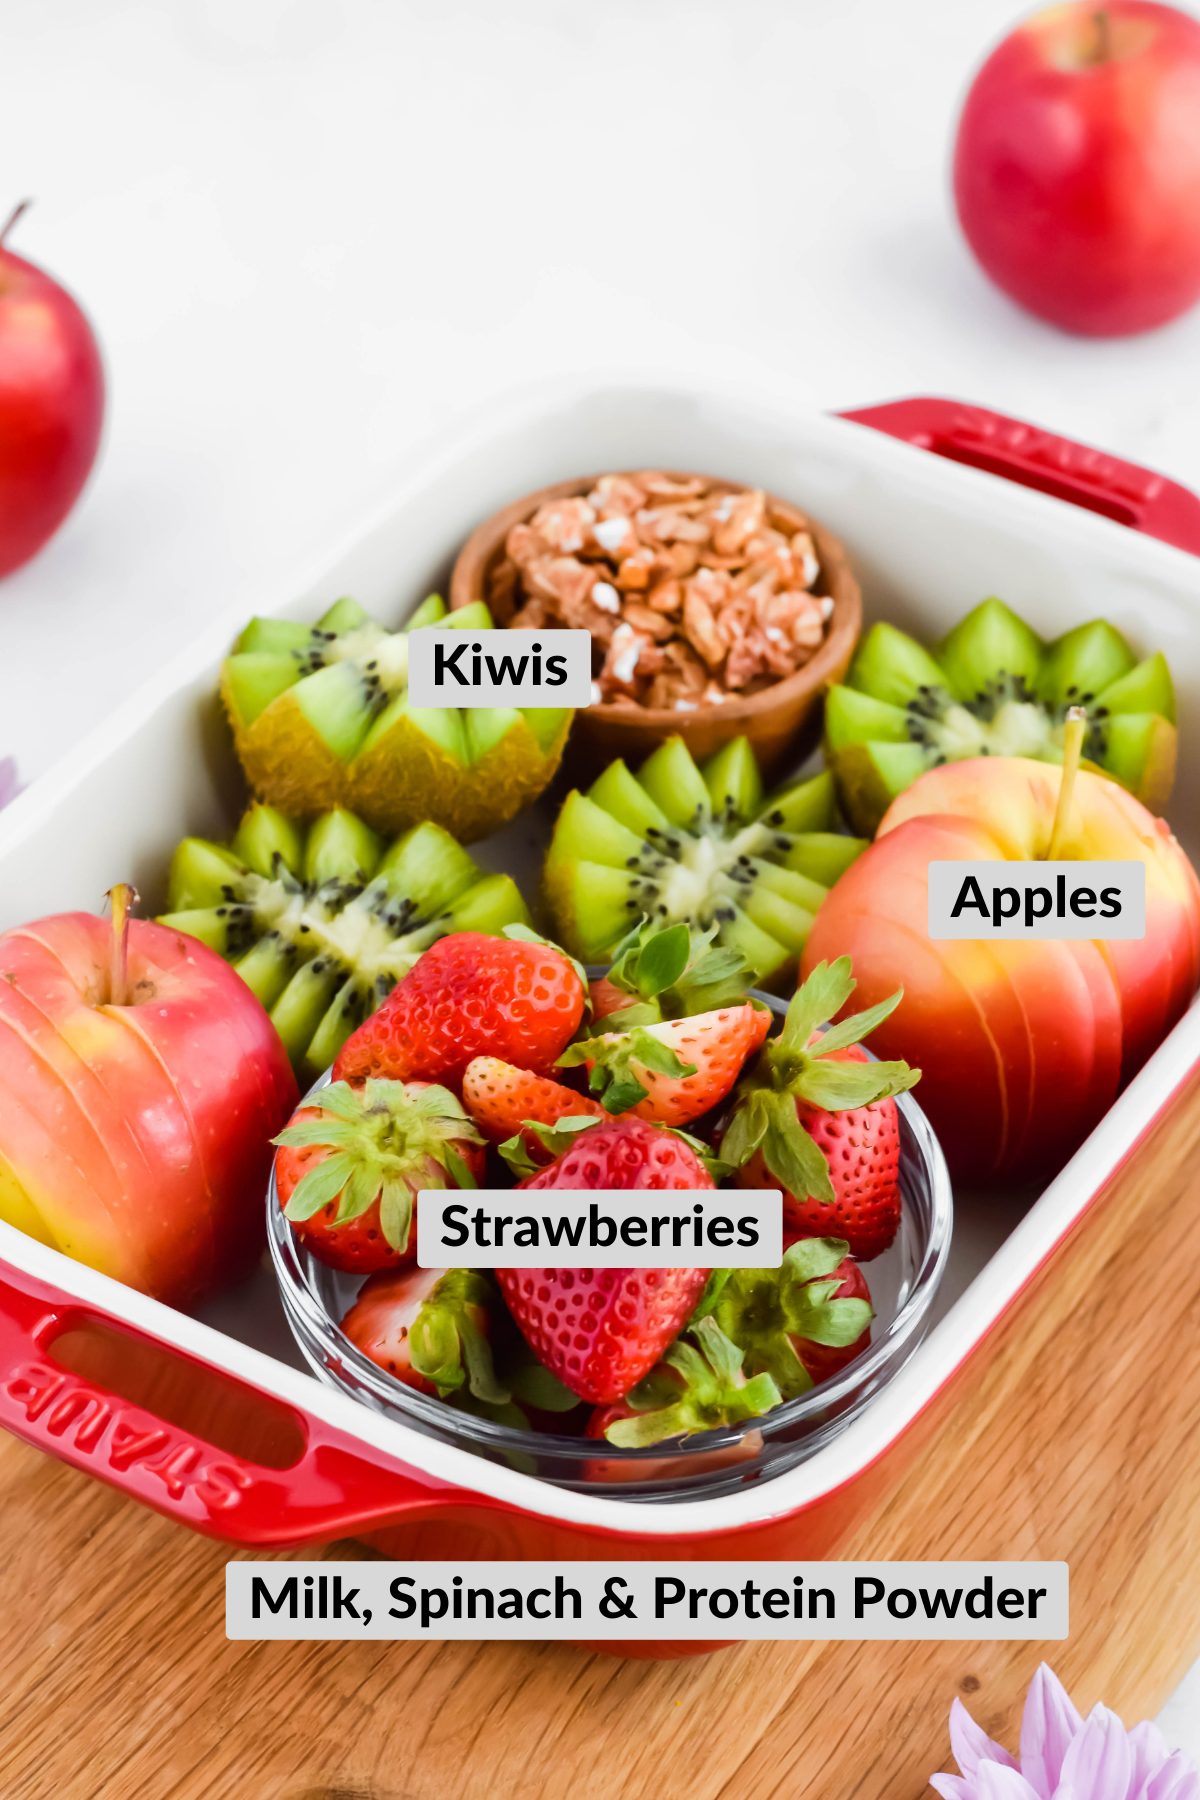 Freshly sliced apples and kiwi, fresh strawberries, and granola placed in a baking dish.